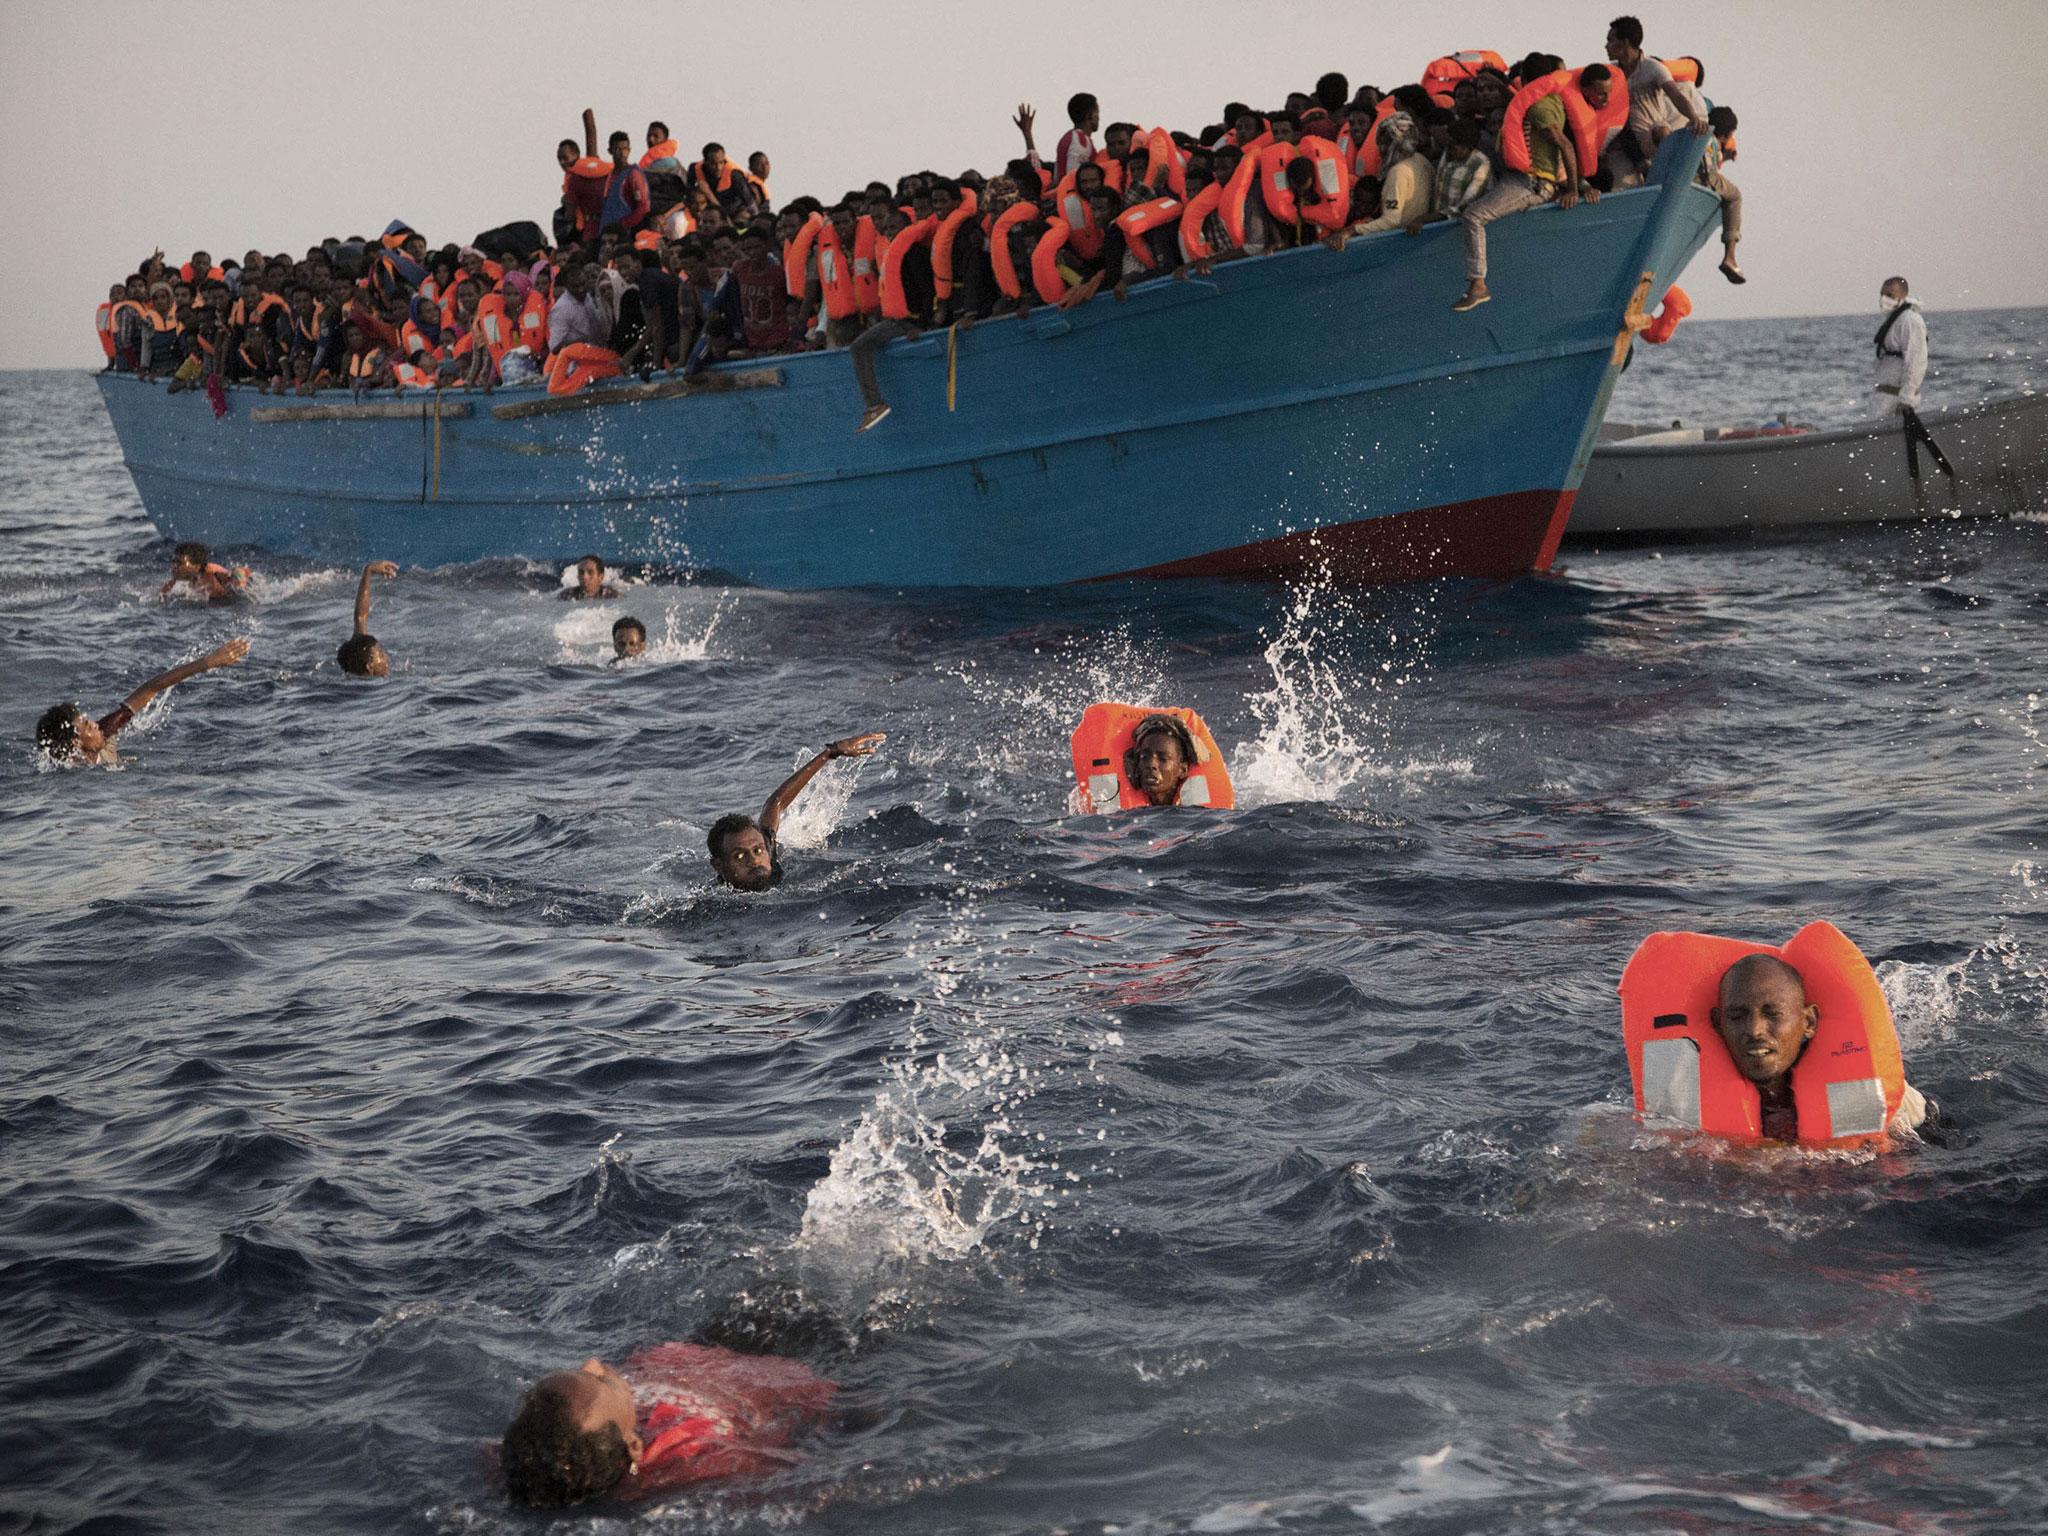 Refugees jump into the water from a crowded wooden boat as they are helped during a rescue operation in the Mediterranean Sea, around 13 miles (20 kilometres) north of Sabratha, Libya, 29 August, 2016